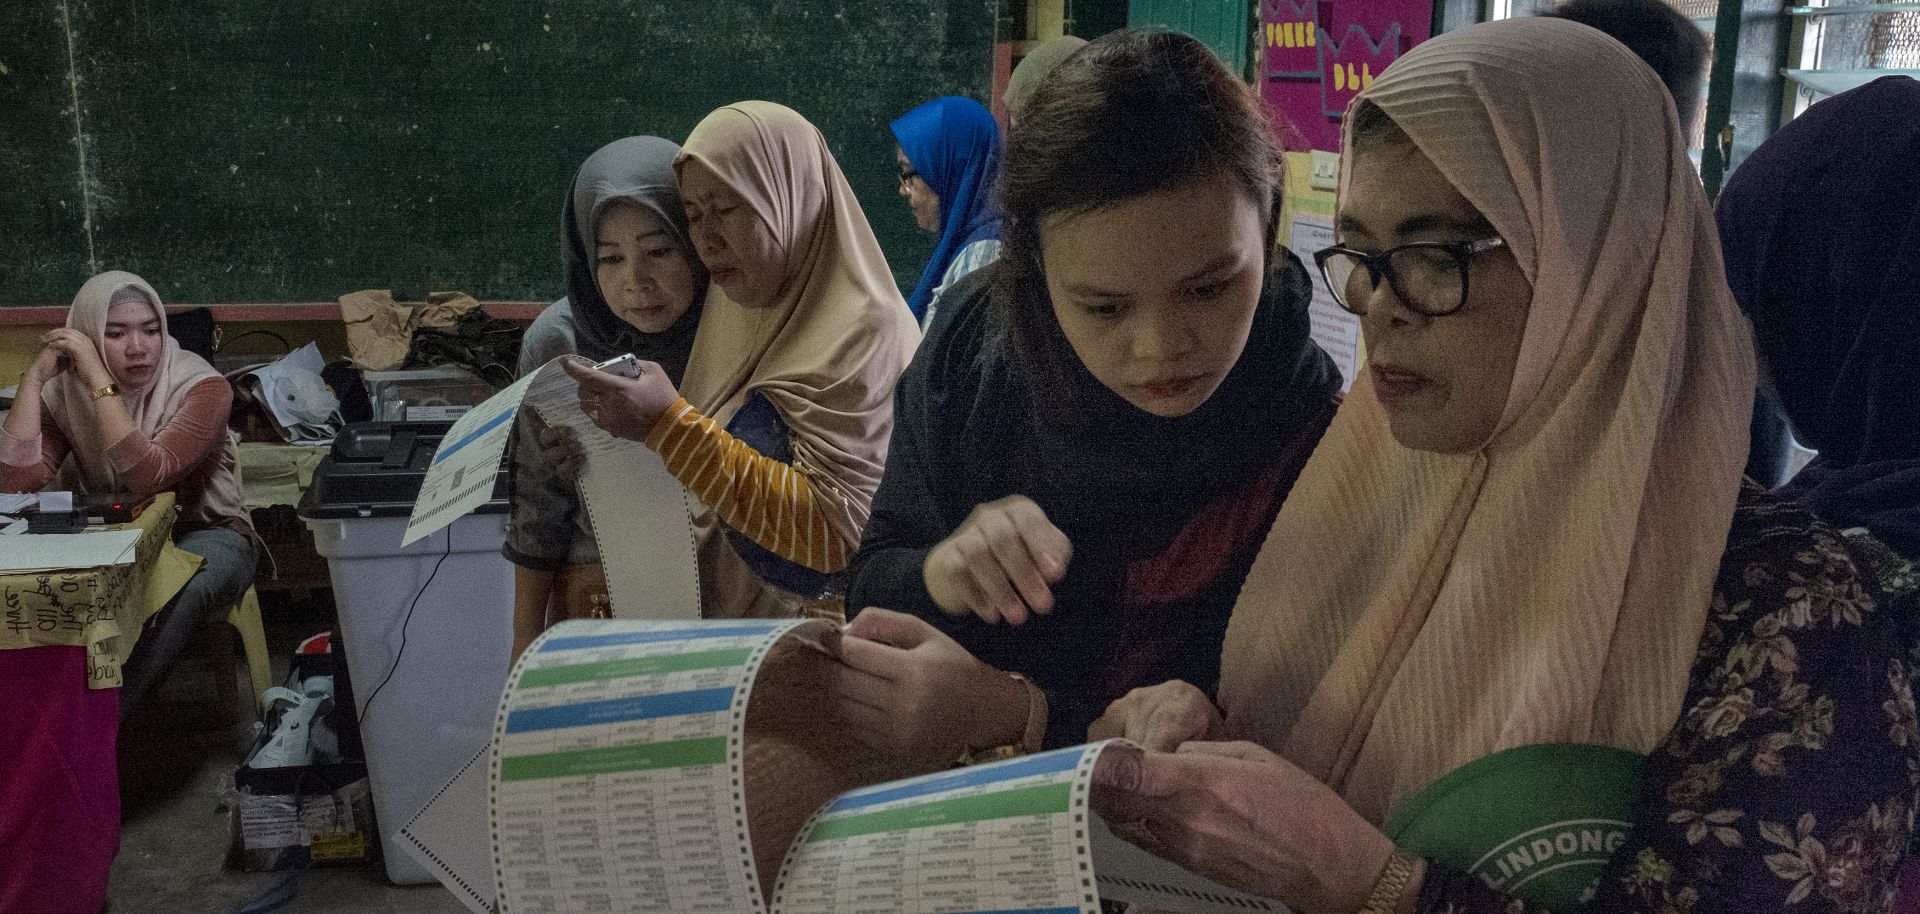 Residents cast their votes in Philippine national and midterm elections on May 13, 2019, in Malabang, Lanao del Sur, in the southern Philippines.